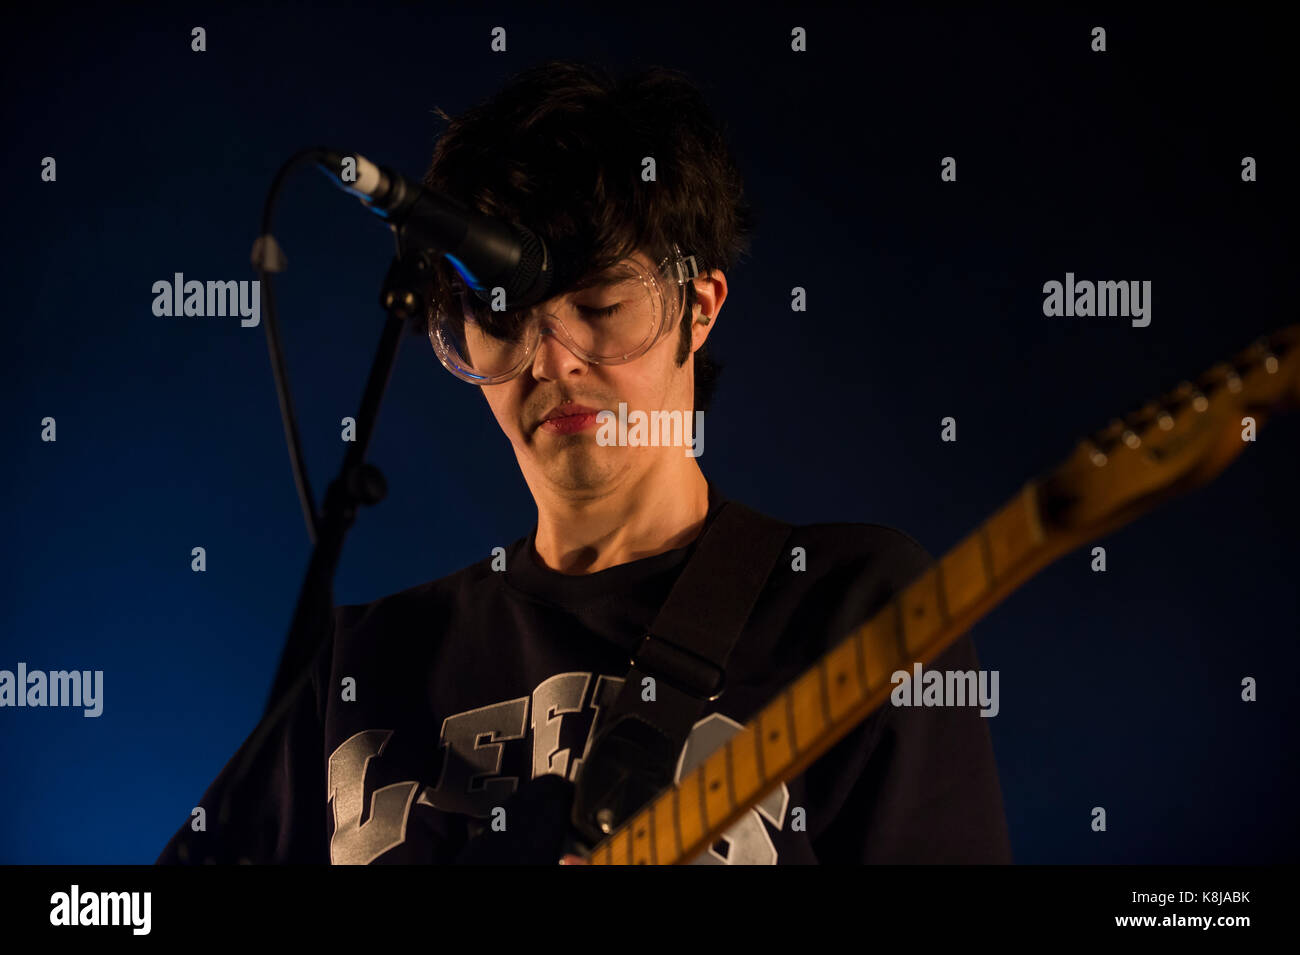 Thornhill, Scotland, UK - September 1, 2017: Will Toledo of American indie rock band Car Seat Headrest during day 1 of Electric Fields Festival. Stock Photo